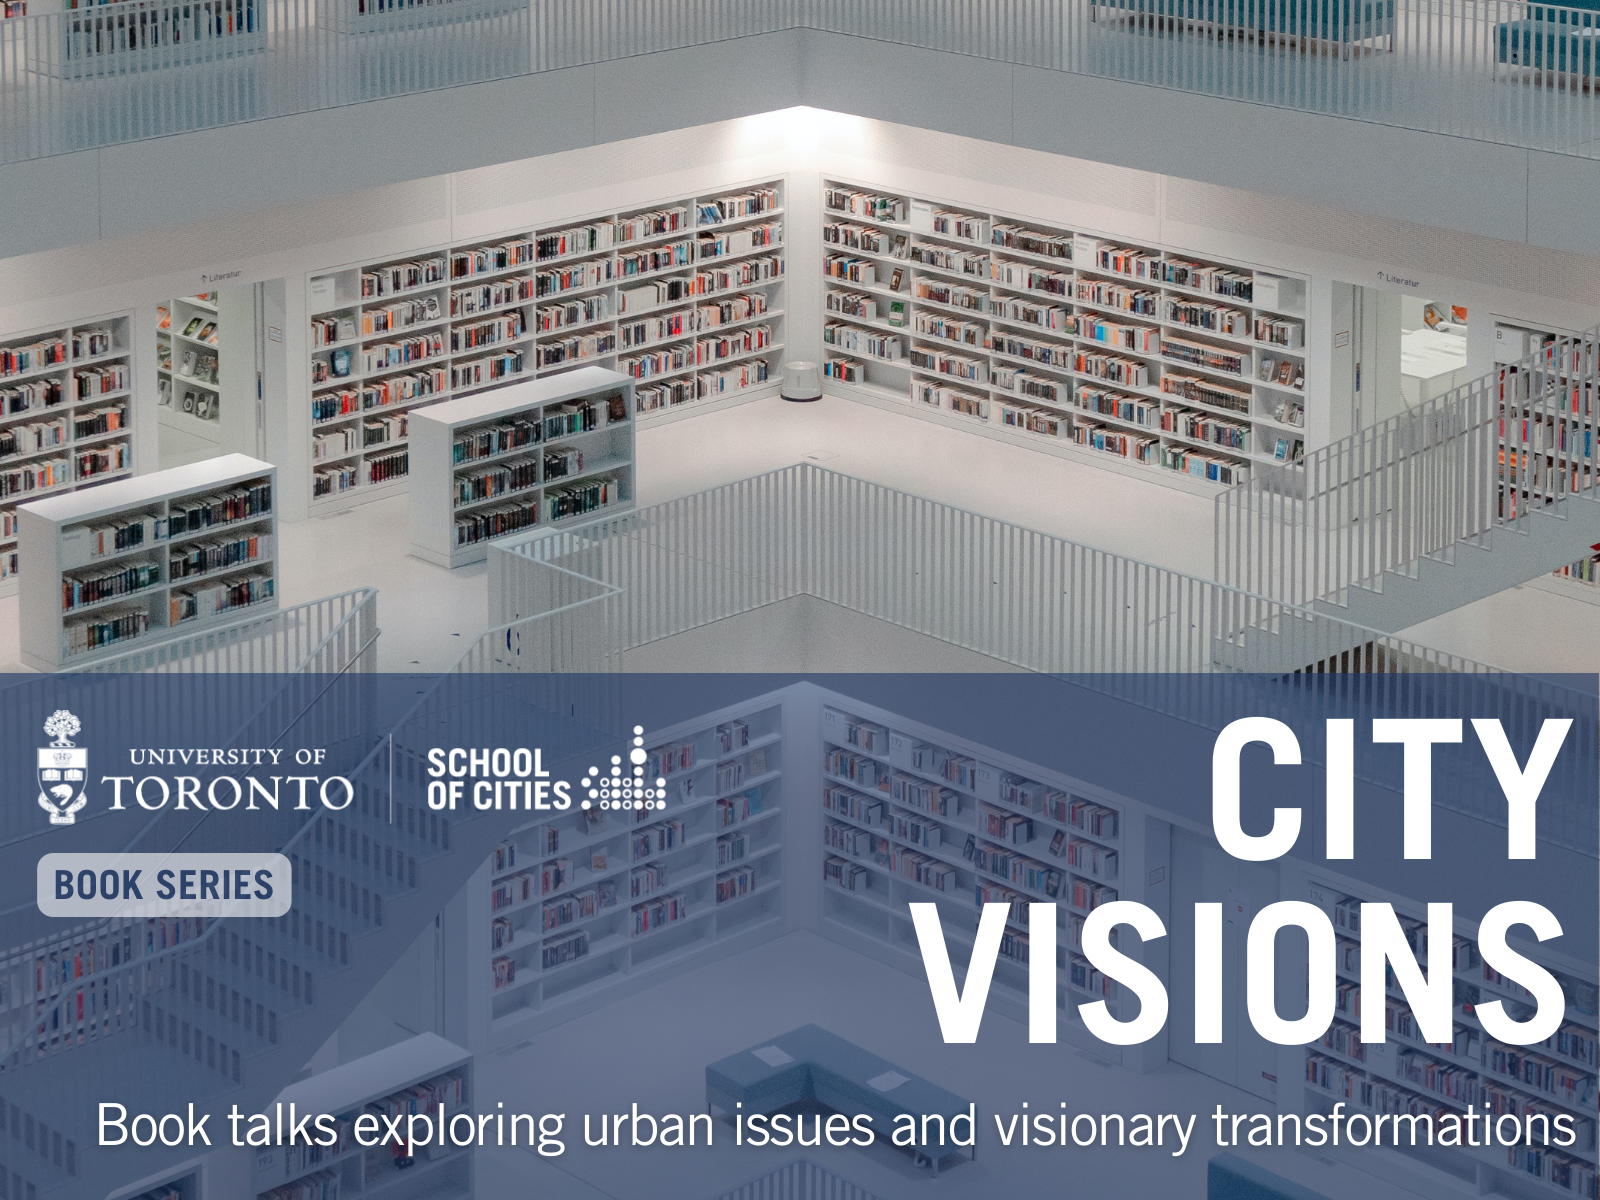 City Visions - Book talks exploring urban issues and visionary transformations